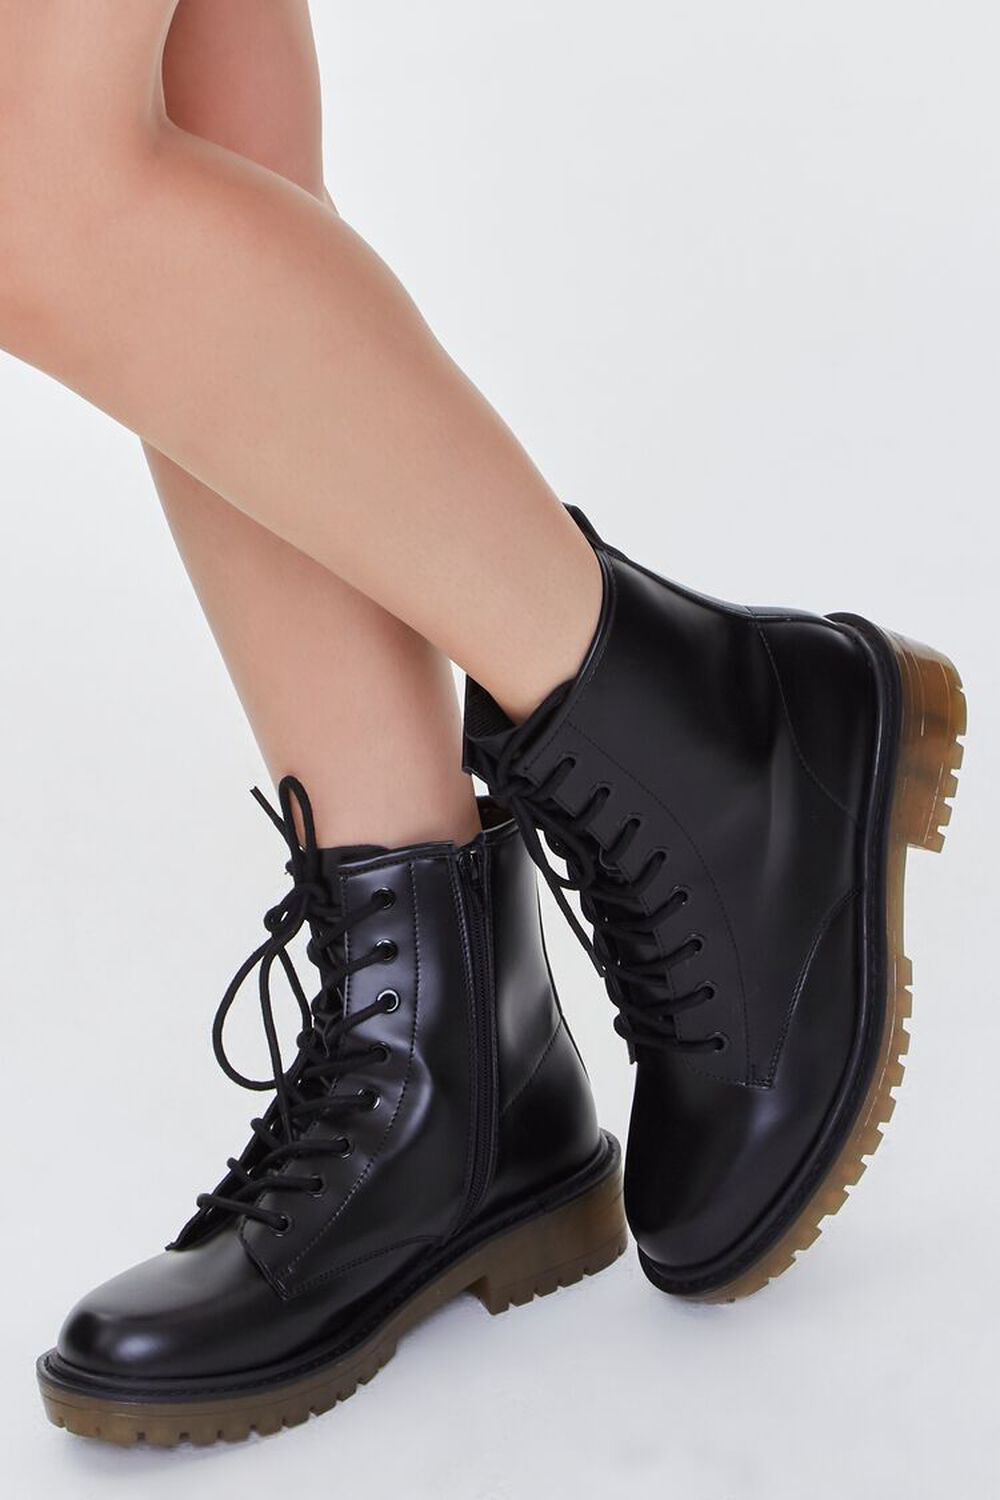 Faux Leather Zip-Up Booties, image 1